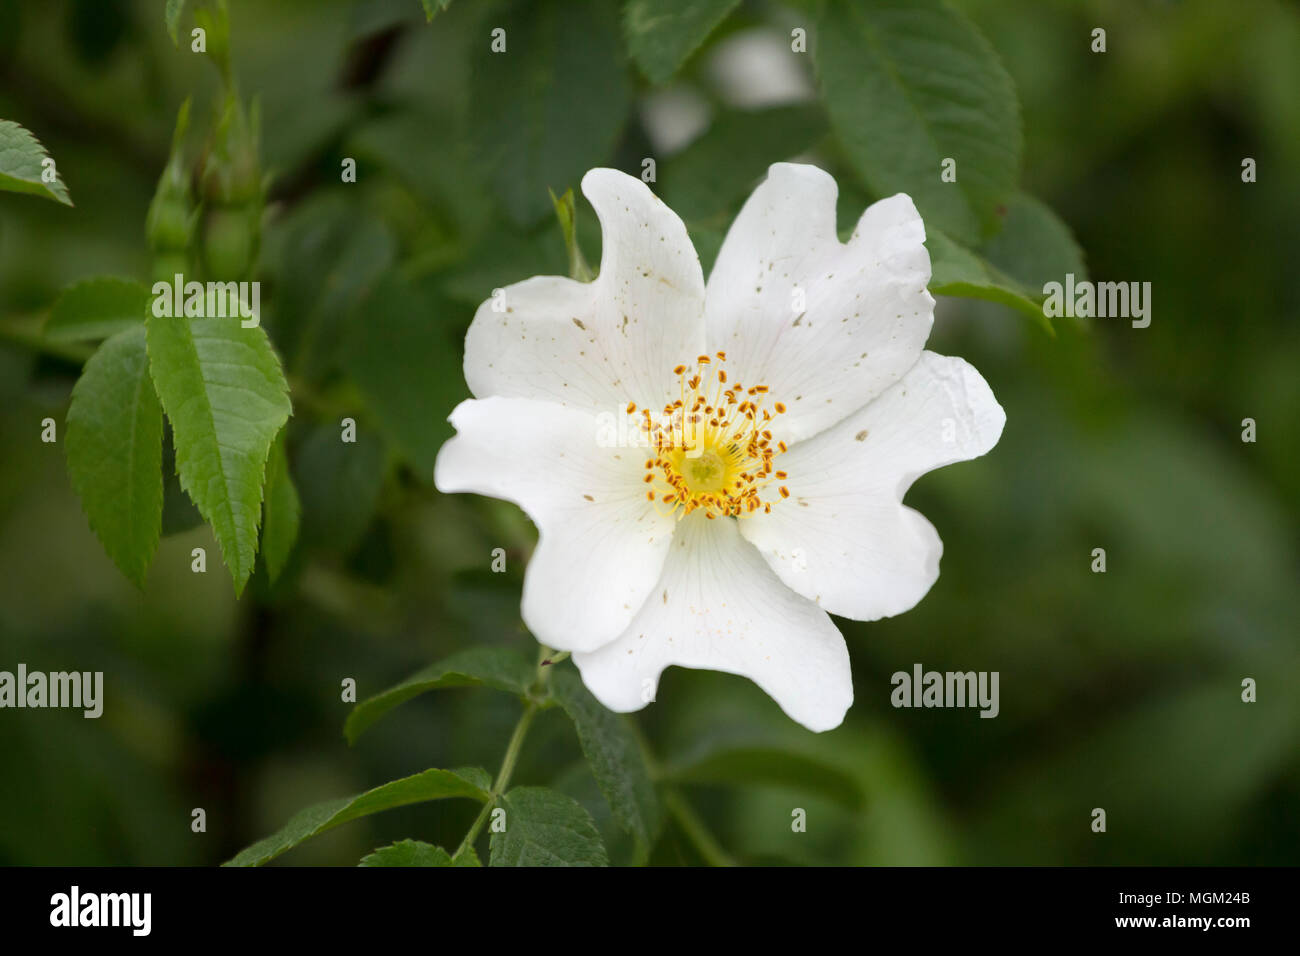 A white flower with yellow pistils on dark green background Stock Photo